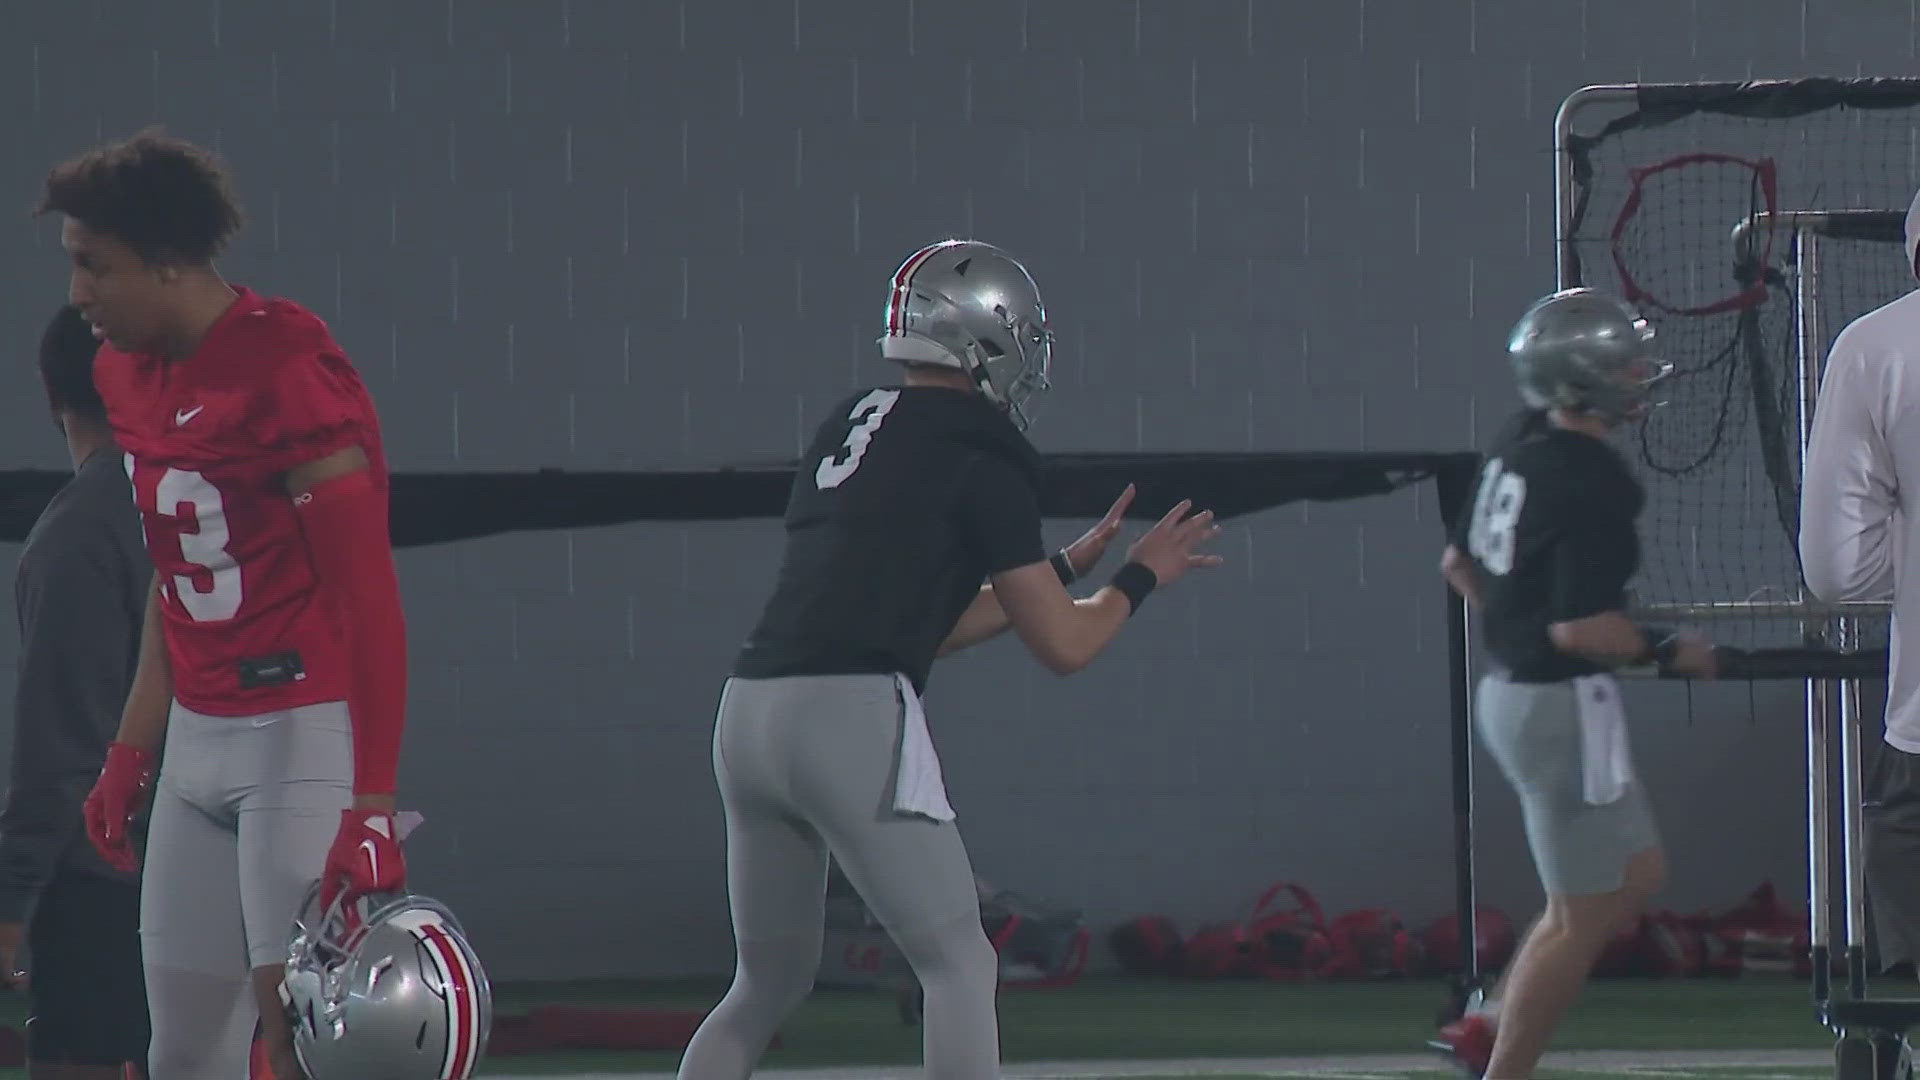 The starting quarterback position at Ohio State is still up for grabs and likely won't be decided until much closer to the beginning of the season.